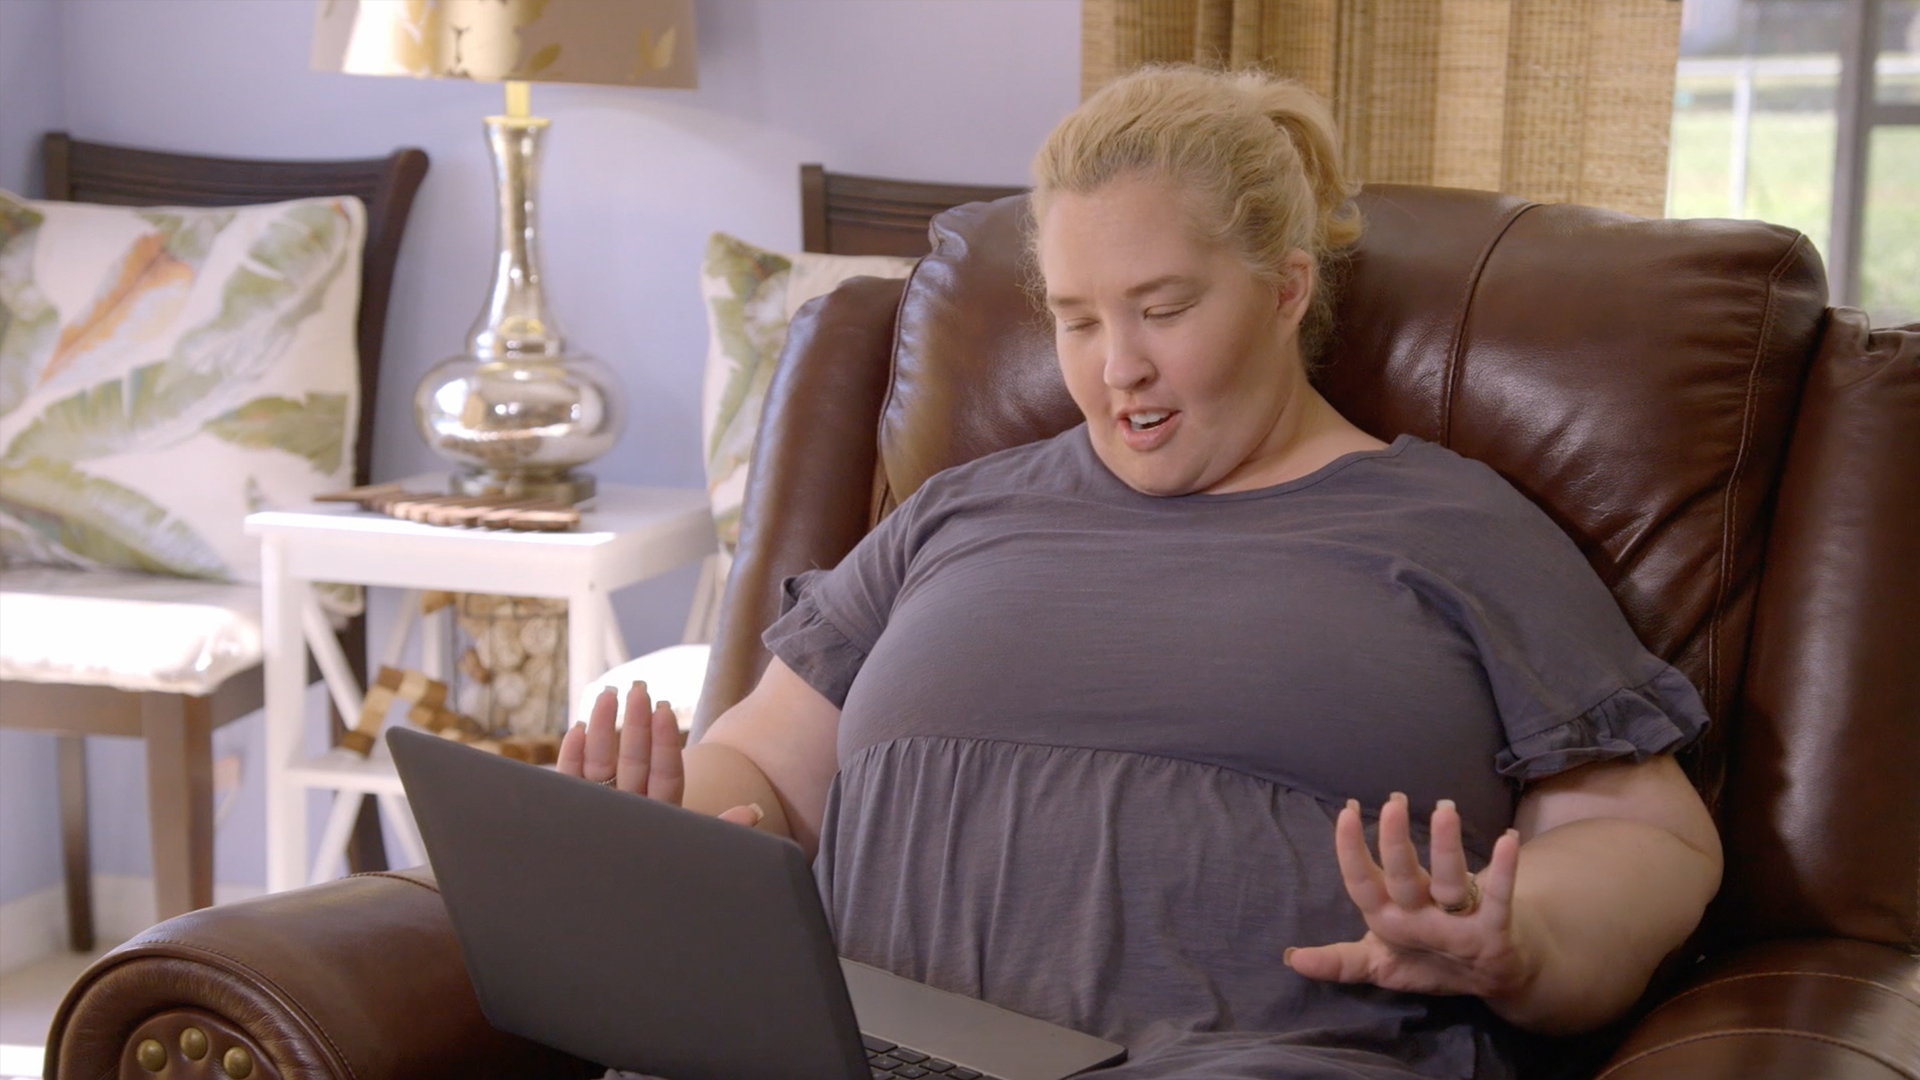 Watch June’s Road To Redemption: Forgiveness Takes Time | Mama June: From Not to Hot Video Extras